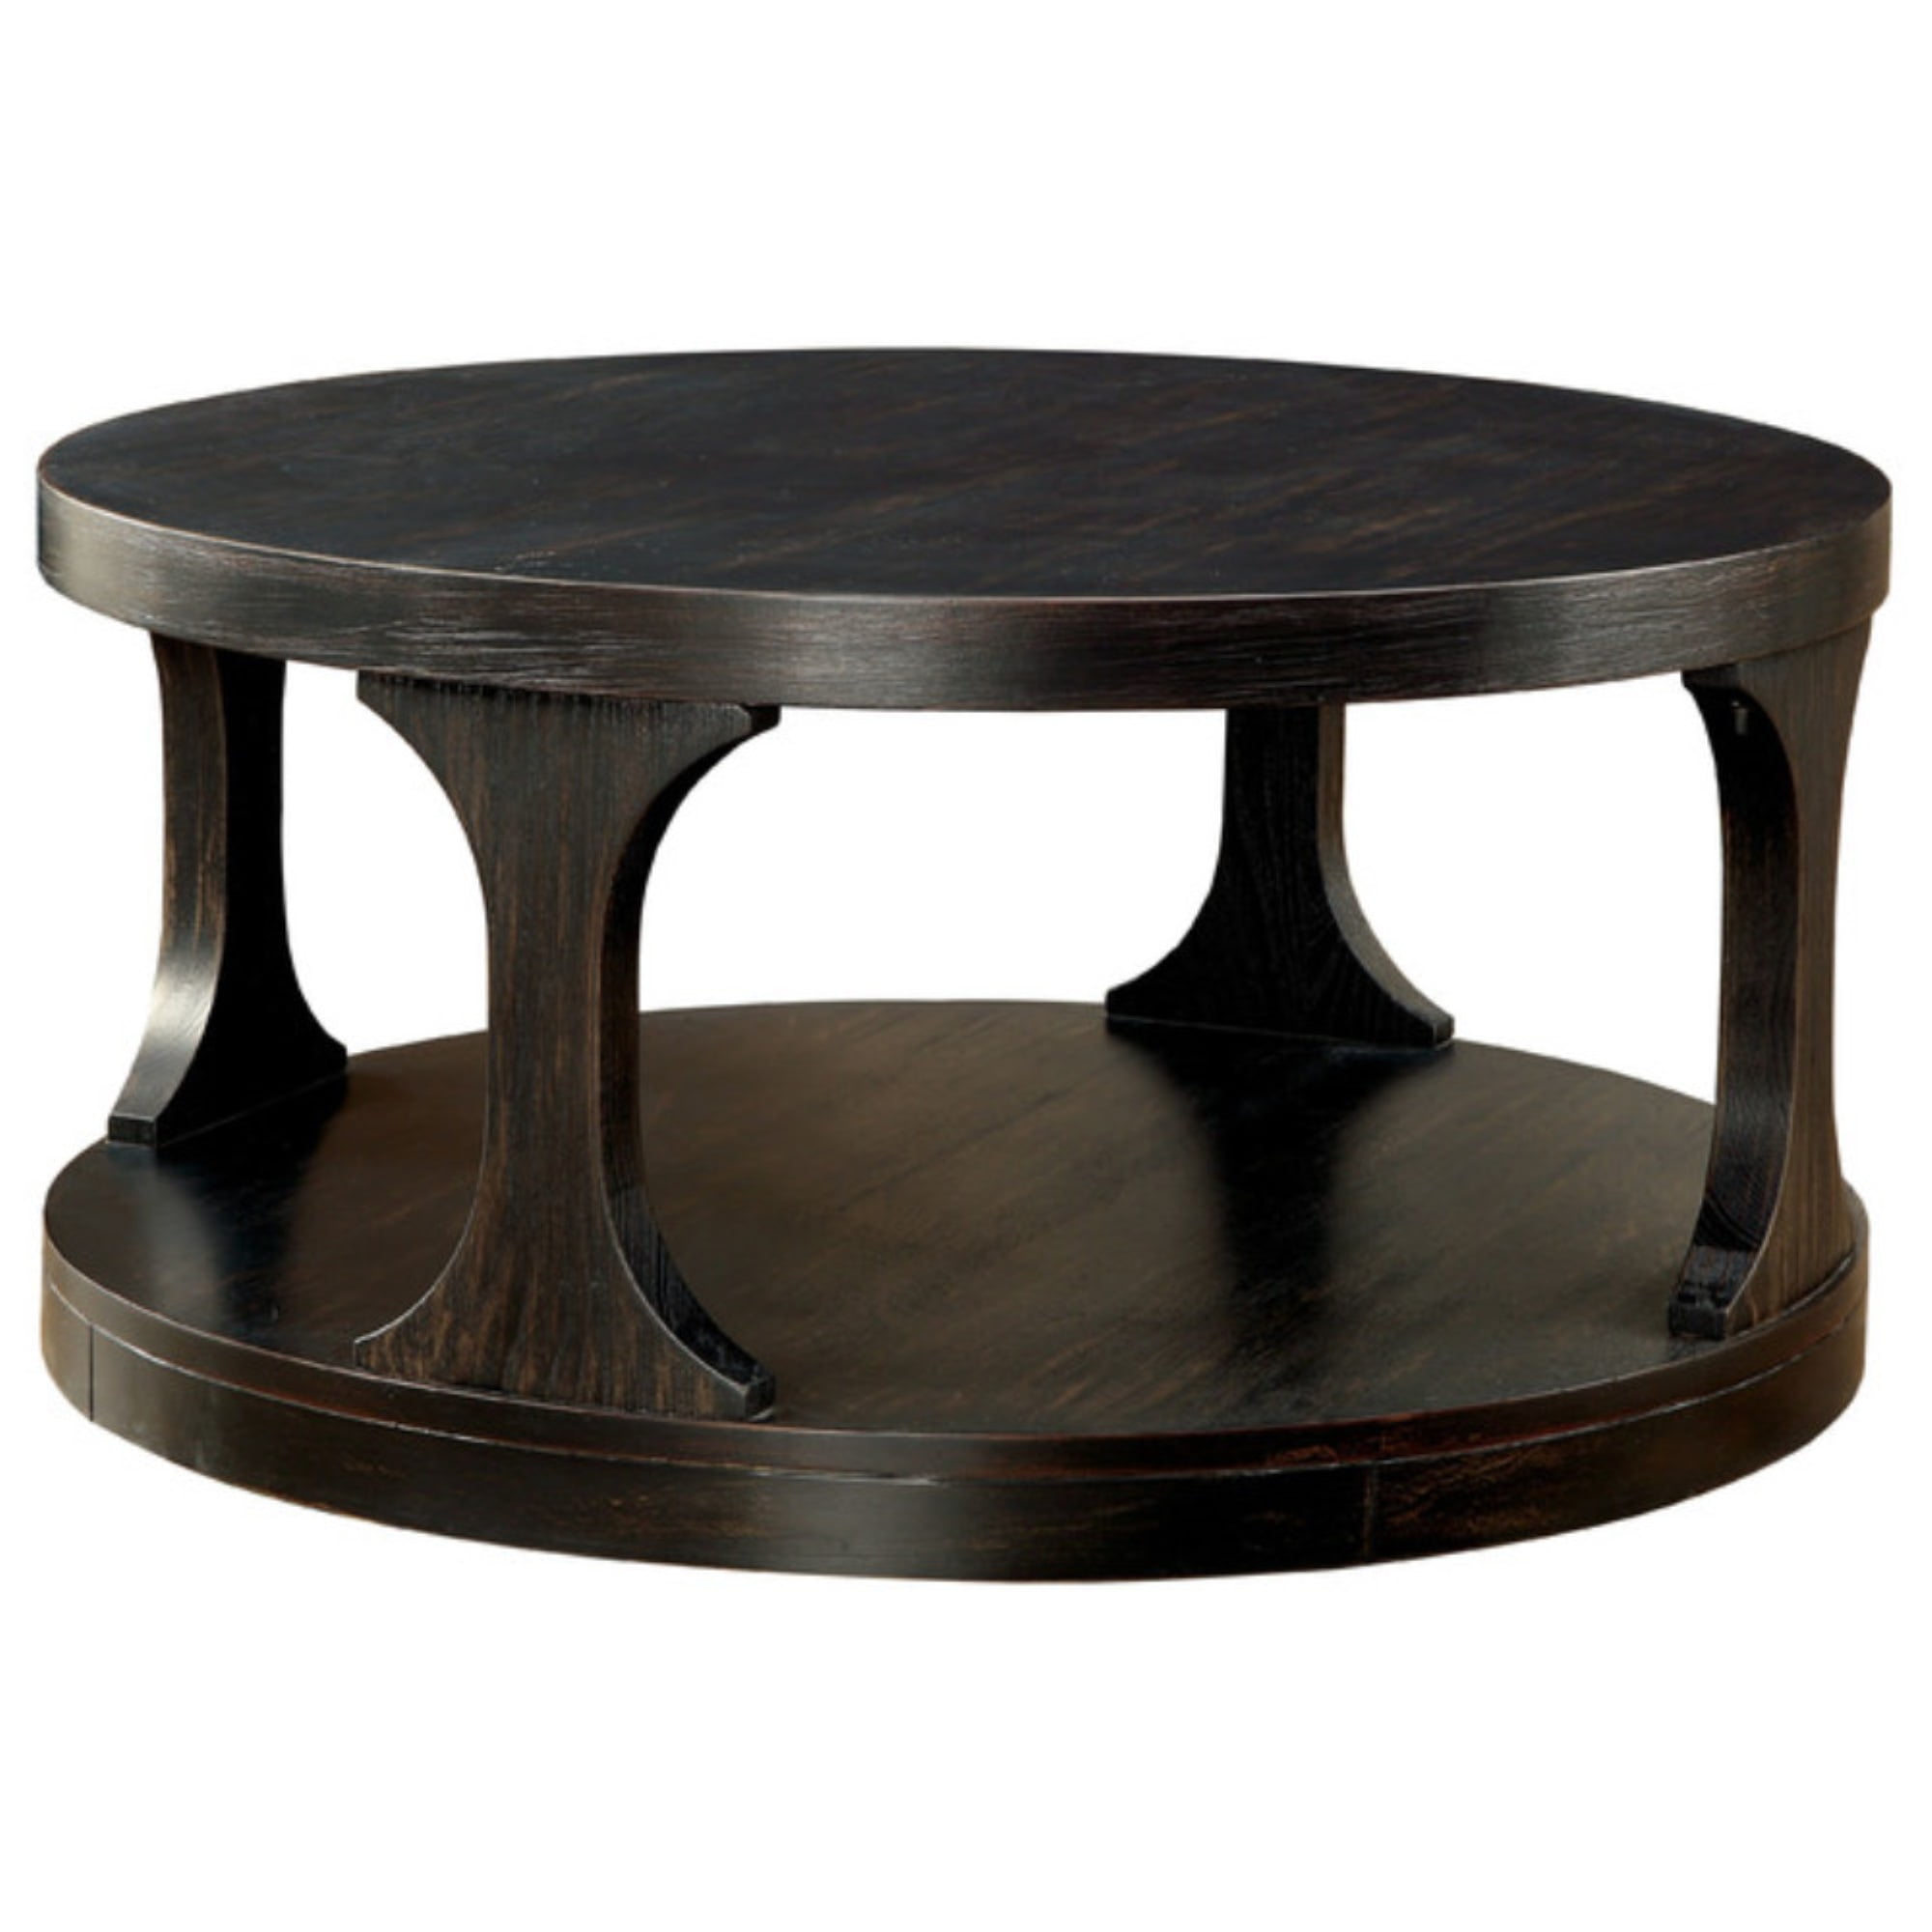 Carrie Transitional Coffee Table, Antique Black - Walmart.com